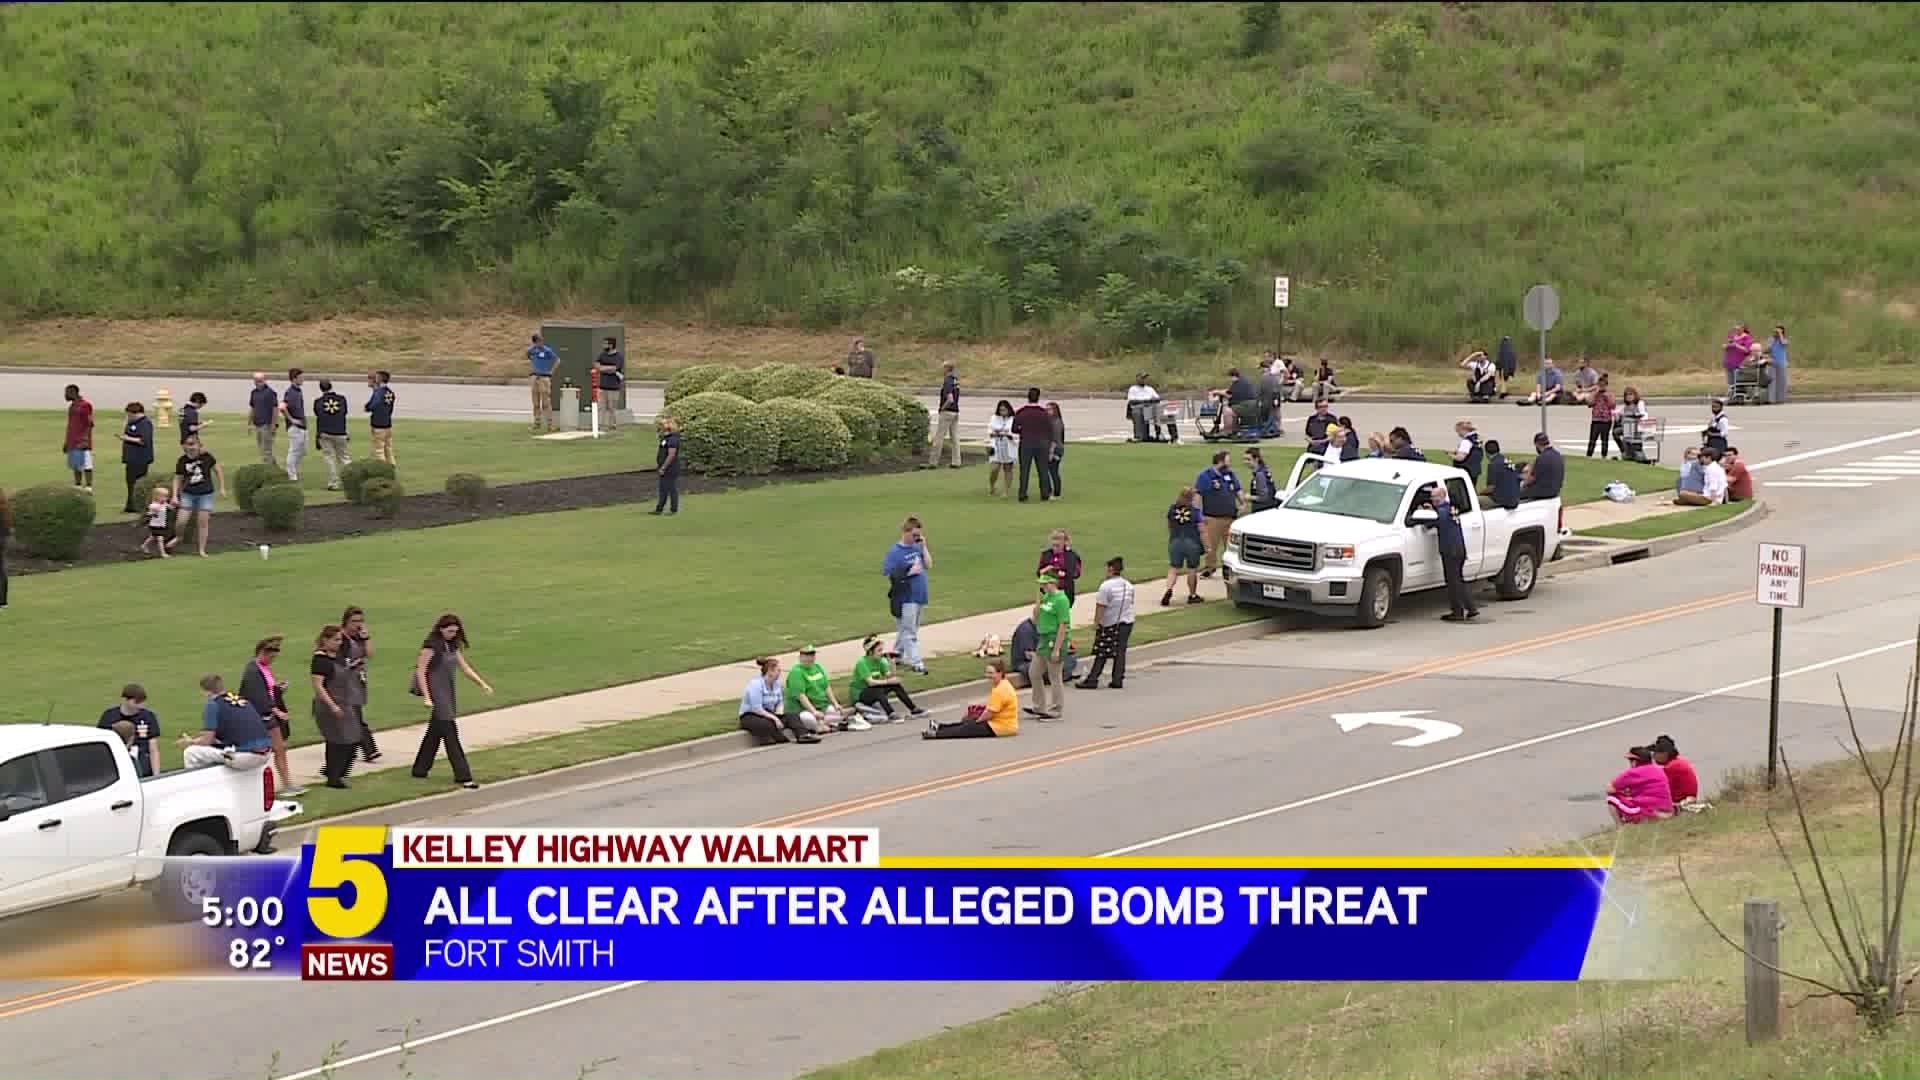 Walmart All Clear After Alleged Bomb Threat